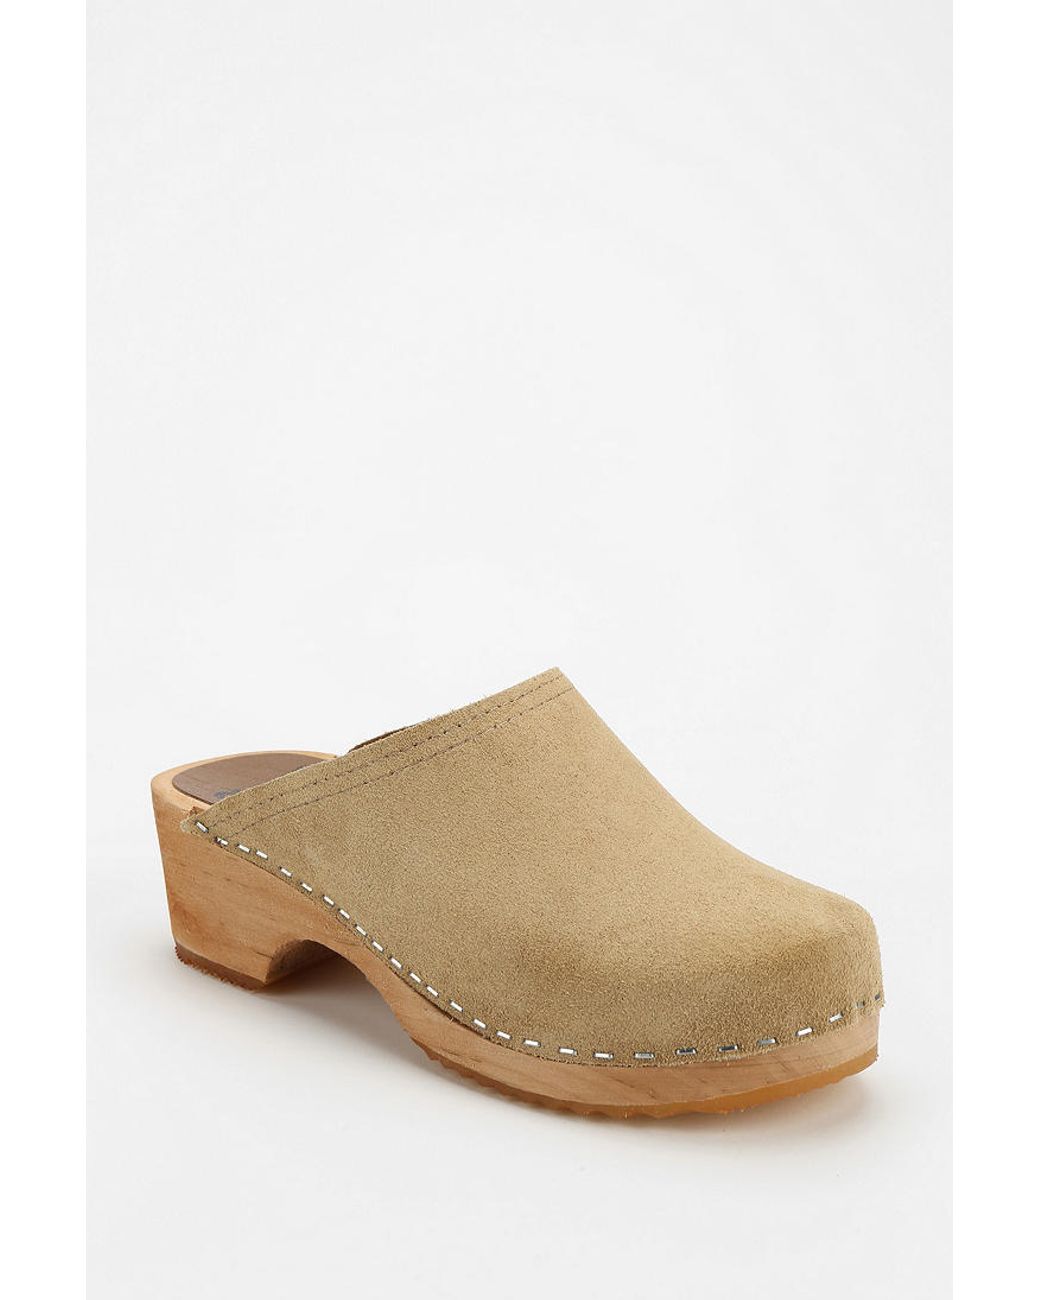 Urban Outfitters Olsson Suede Clog in Natural | Lyst